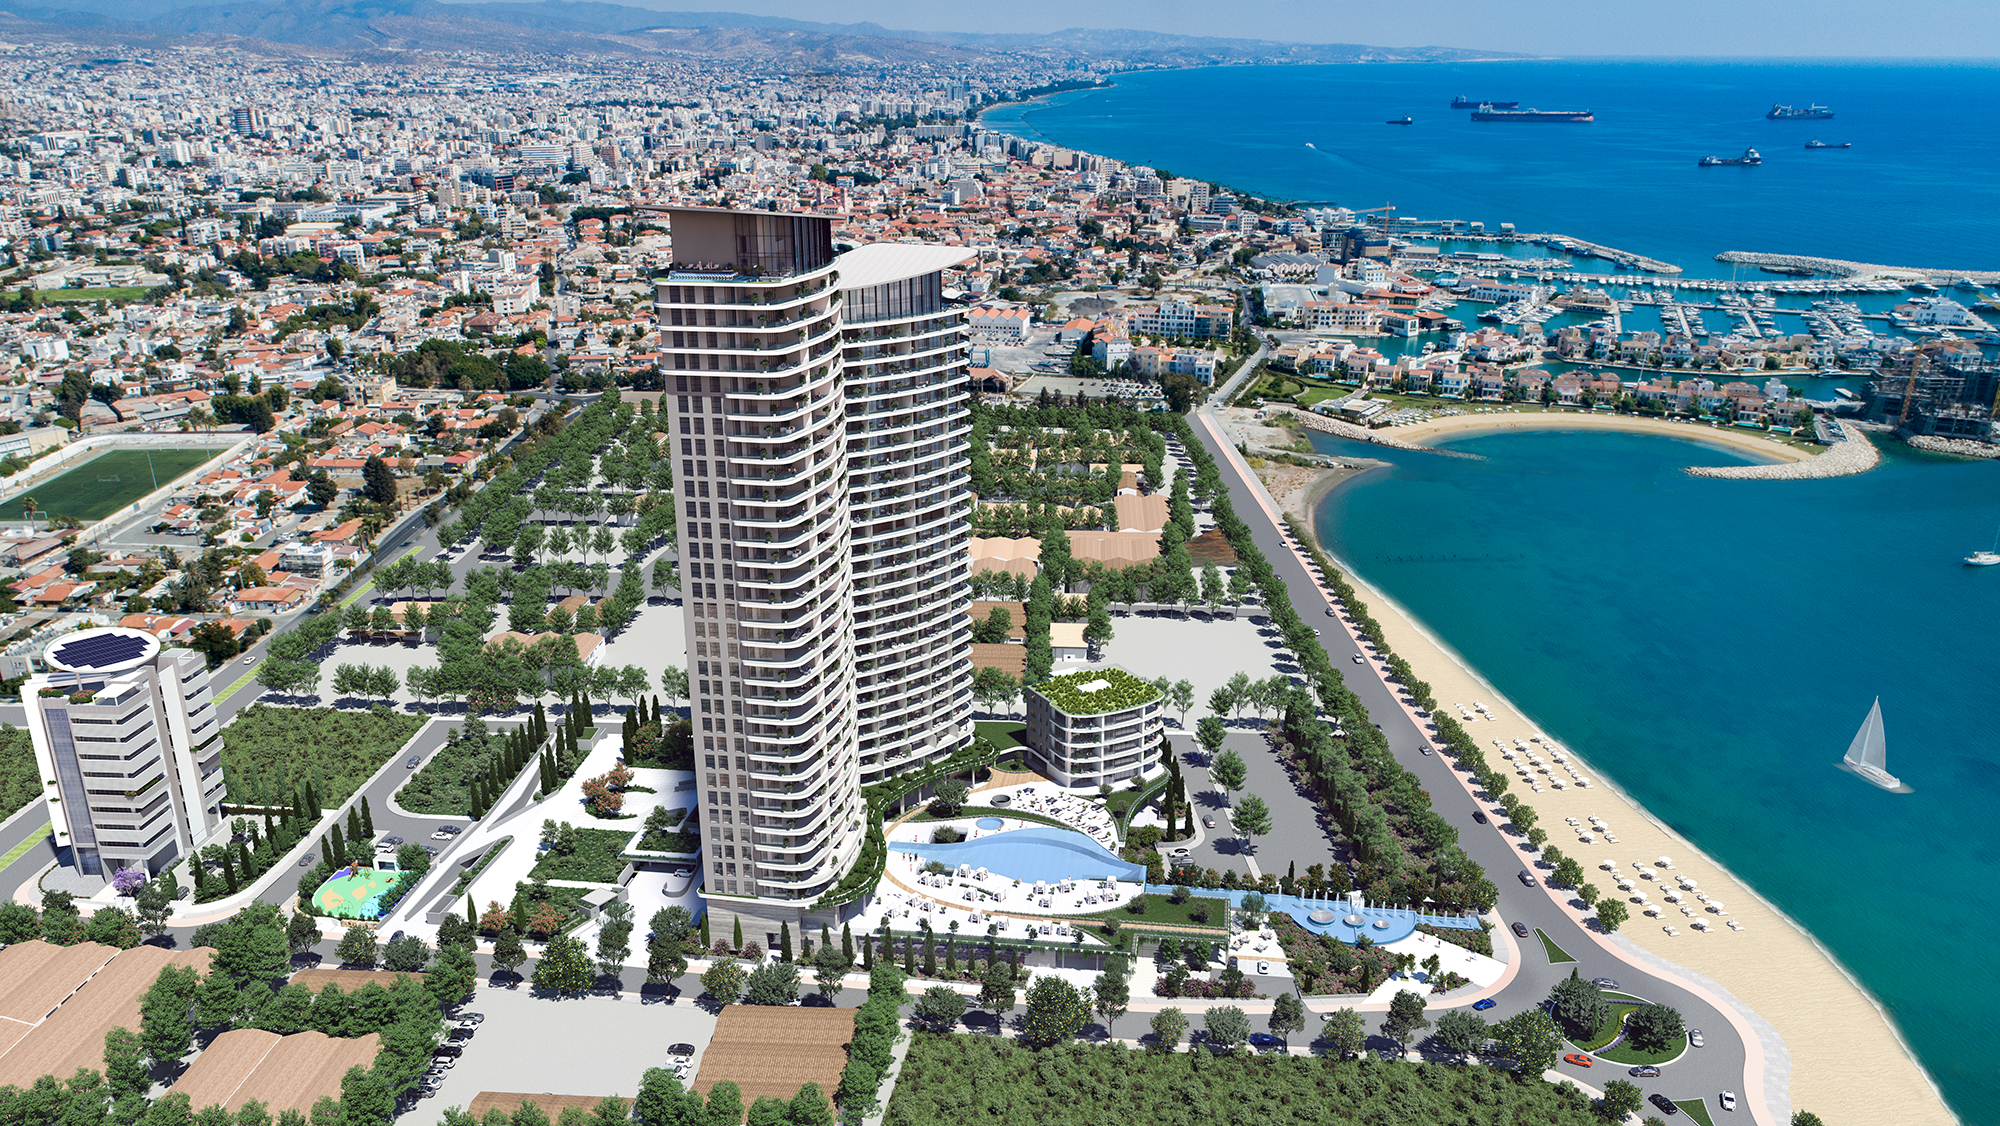 A new sun-filled destination on Europe’s new Riviera!